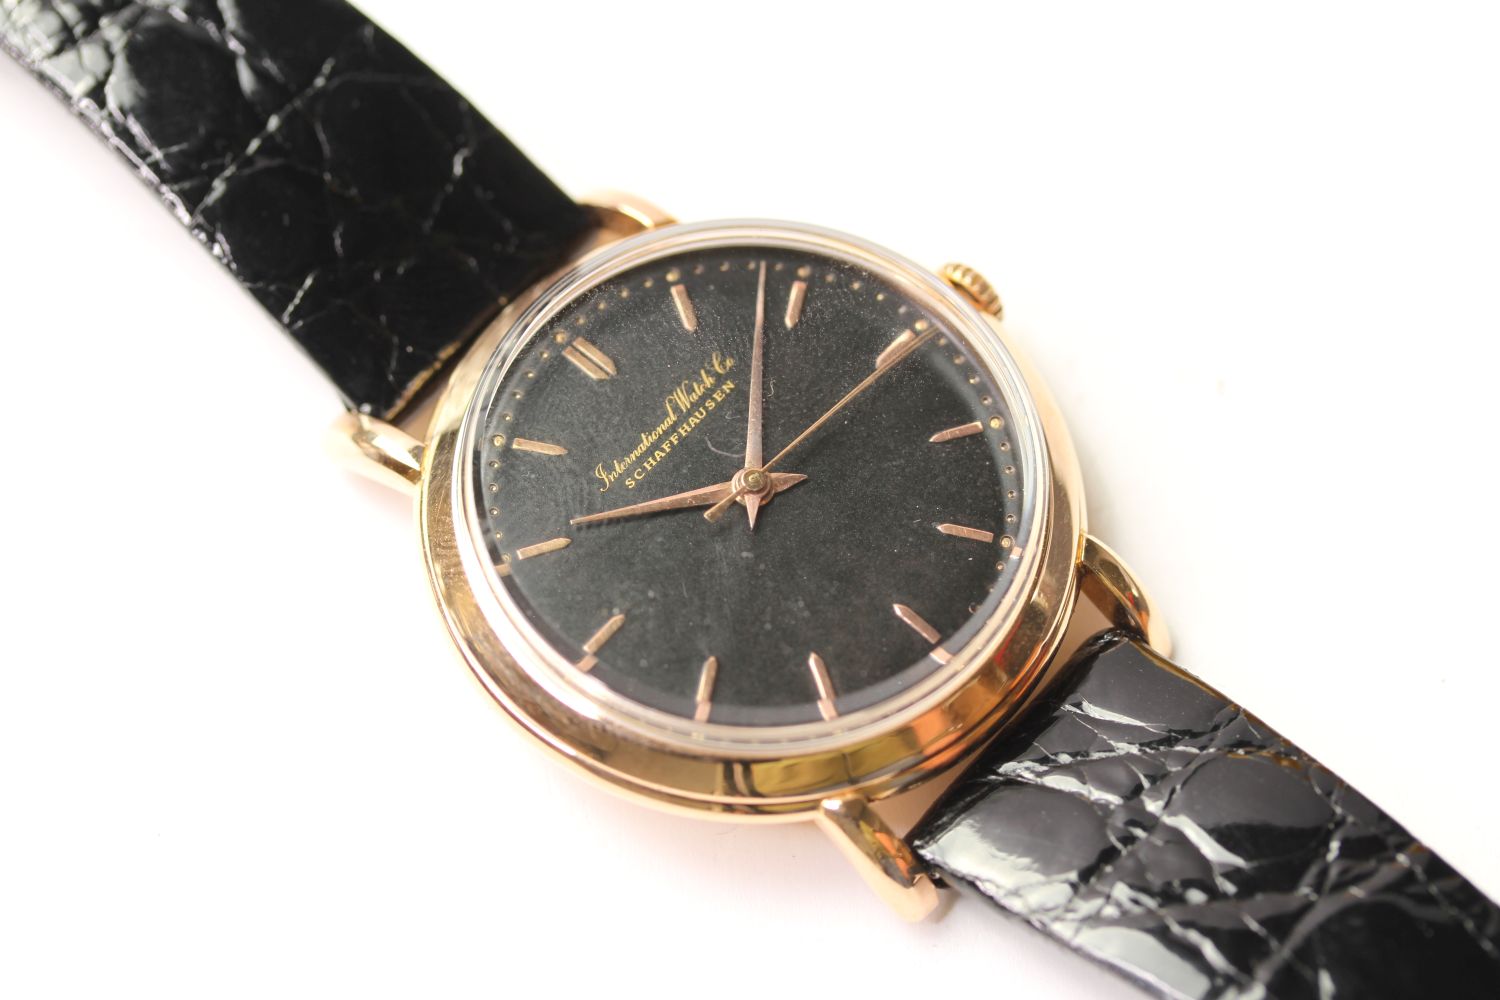 VINTAGE 18CT ROSE GOLD IWC SCHAFFHAUSEN DRESS WATCH, circular black dial, rose gold hour markers and